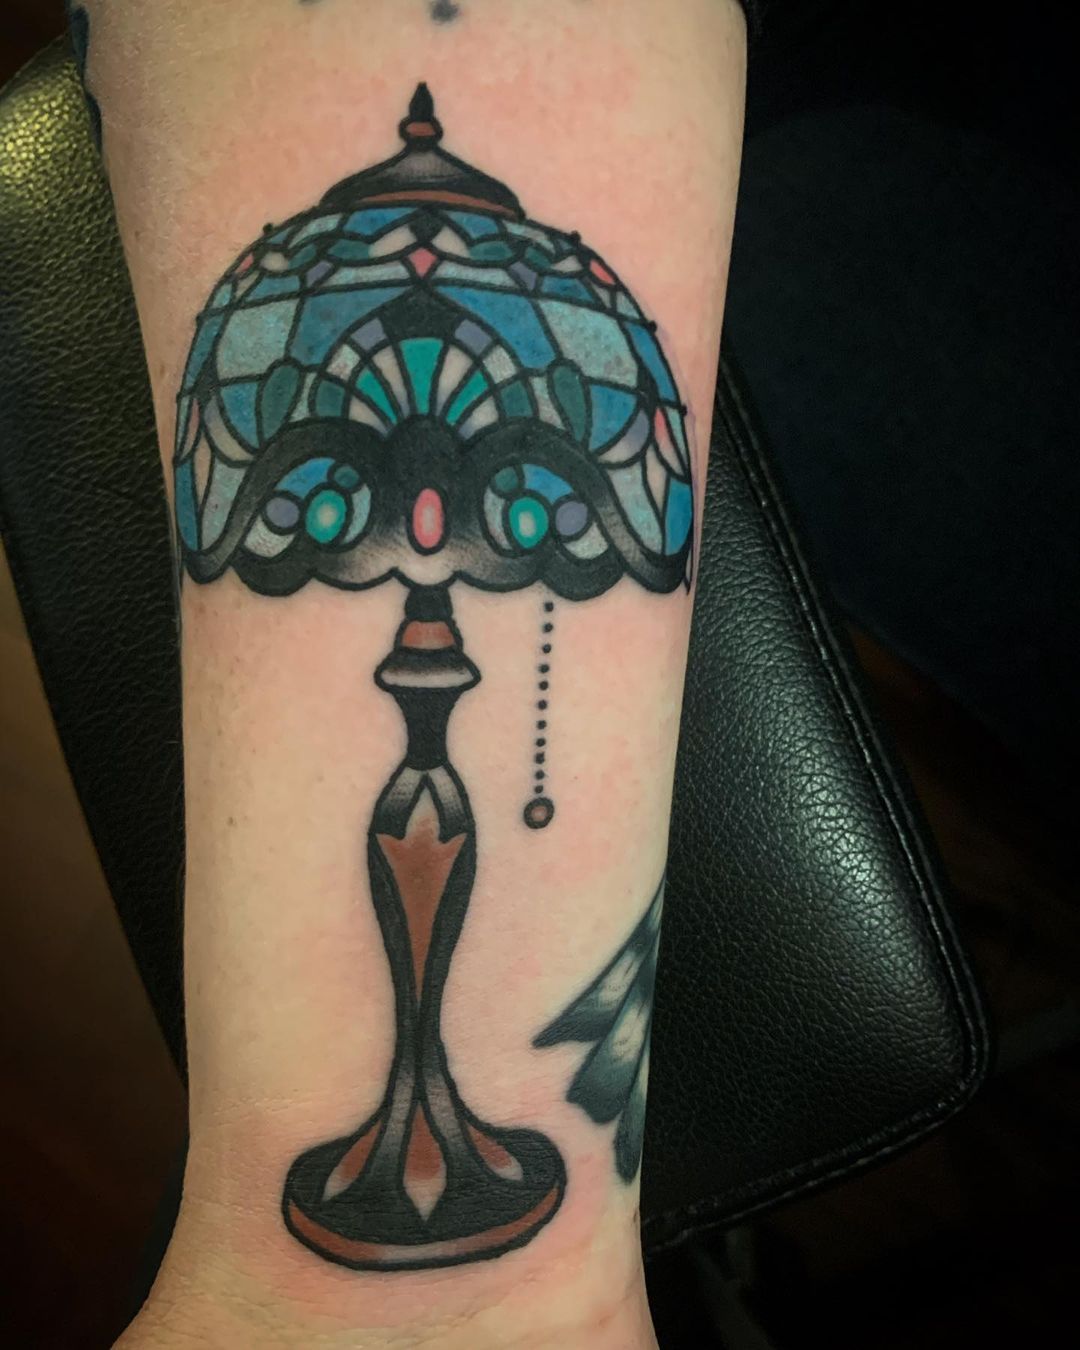 The lamp from Talking Heads'... - Miss Pokes Tattoo | Facebook